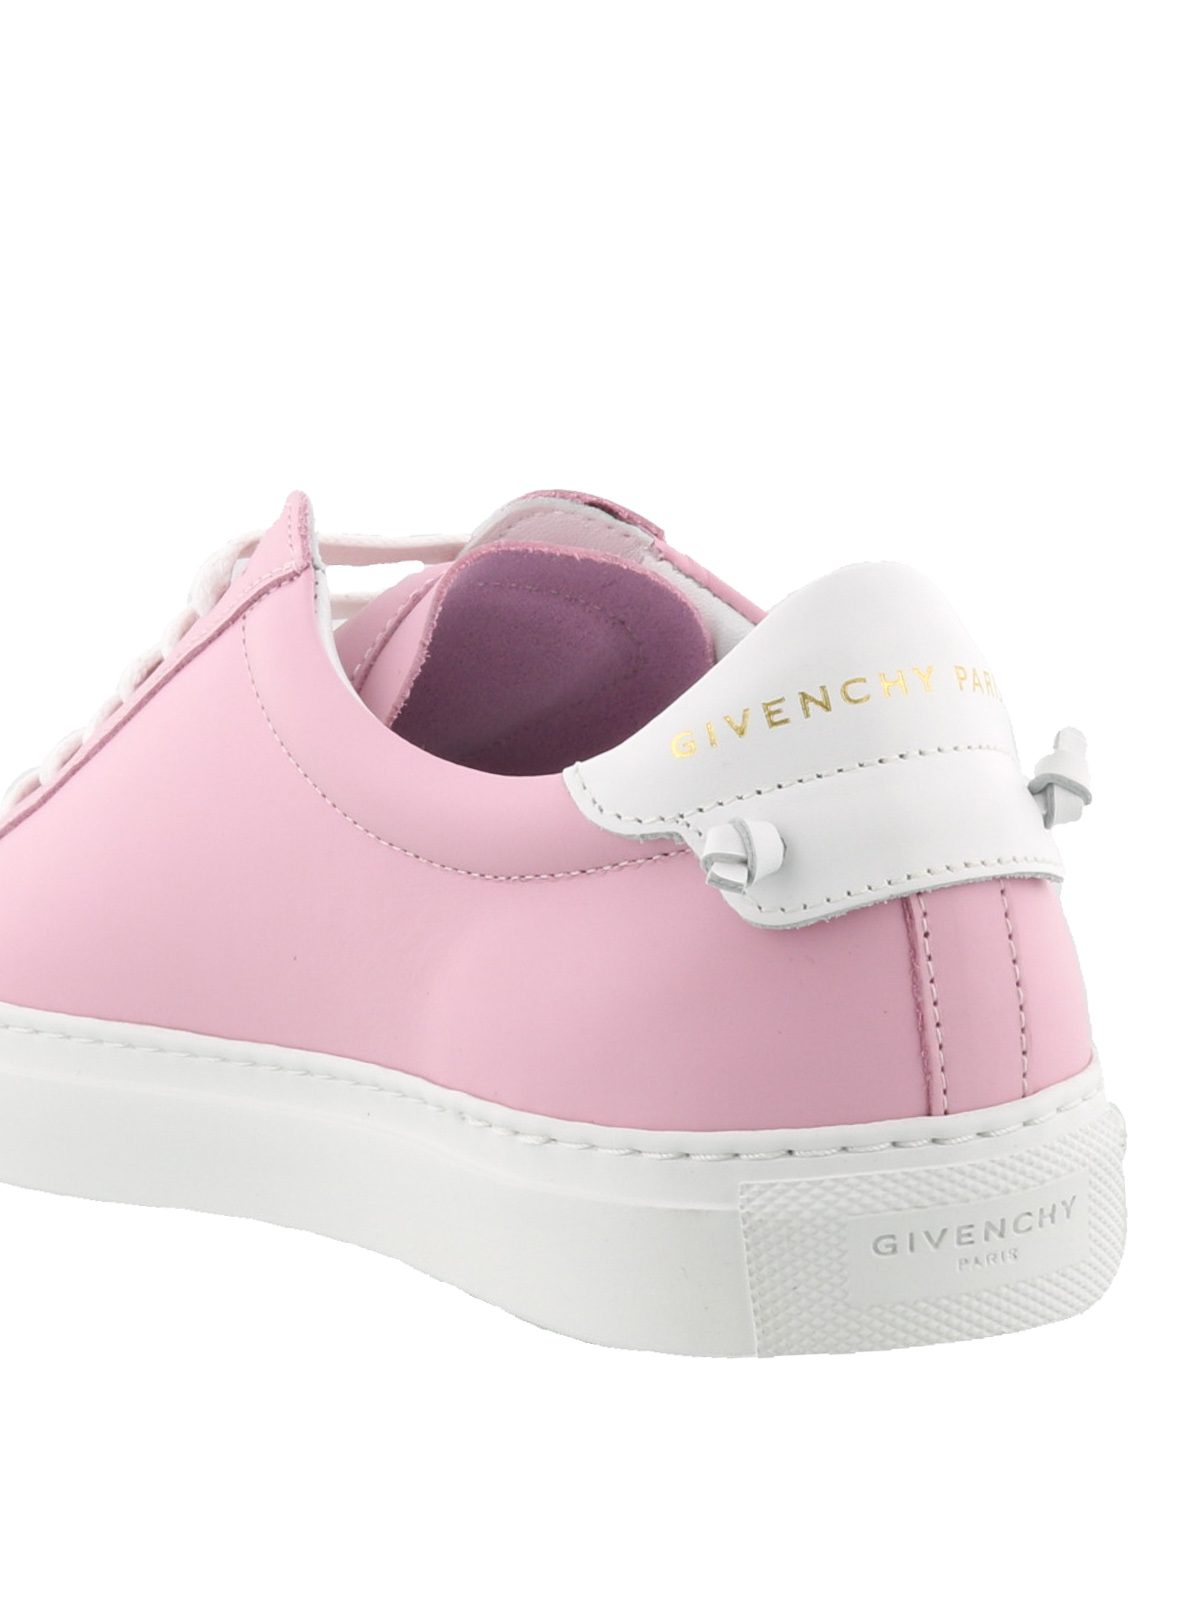 svinge Dræbte dis Trainers Givenchy - Knots pink leather sneakers - BE08219817670